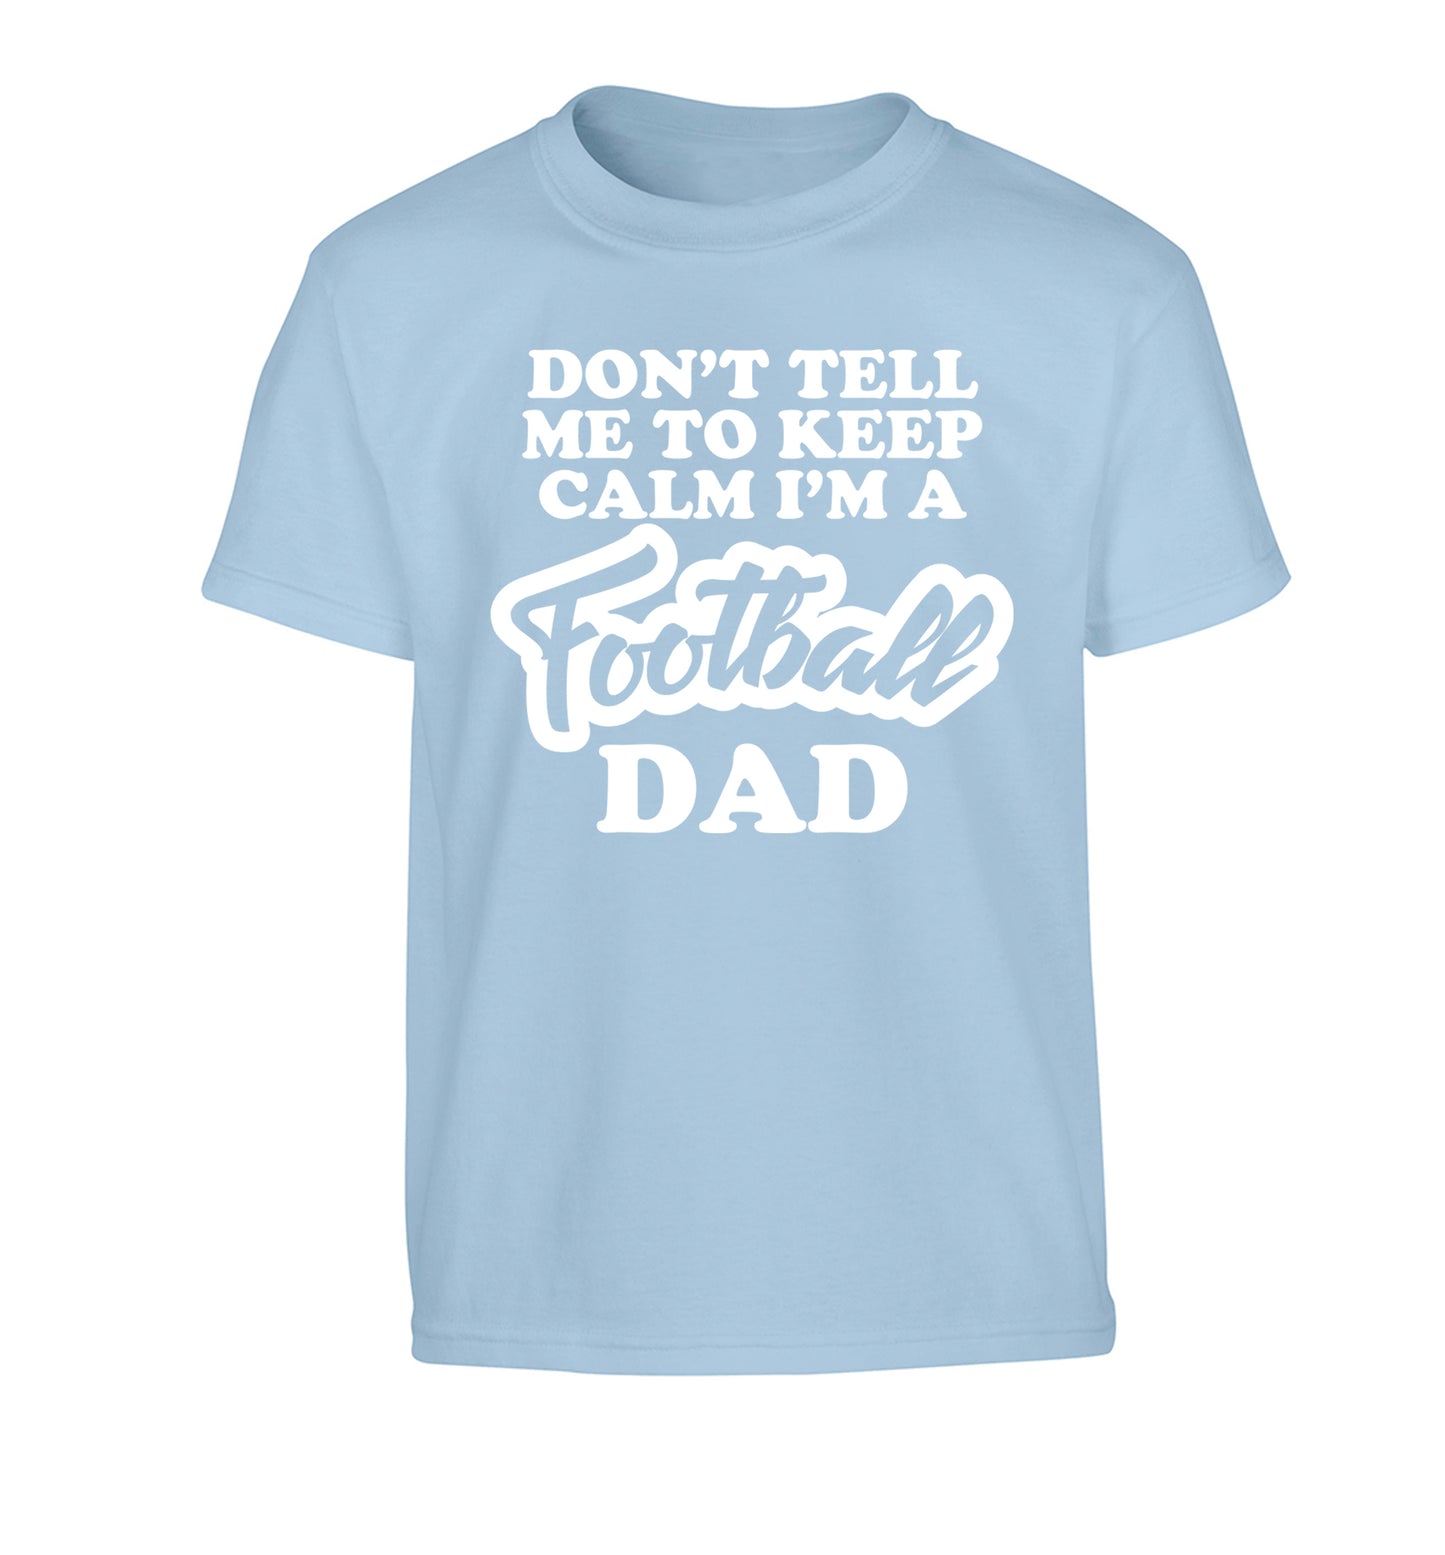 Don't tell me to keep calm I'm a football dad Children's light blue Tshirt 12-14 Years